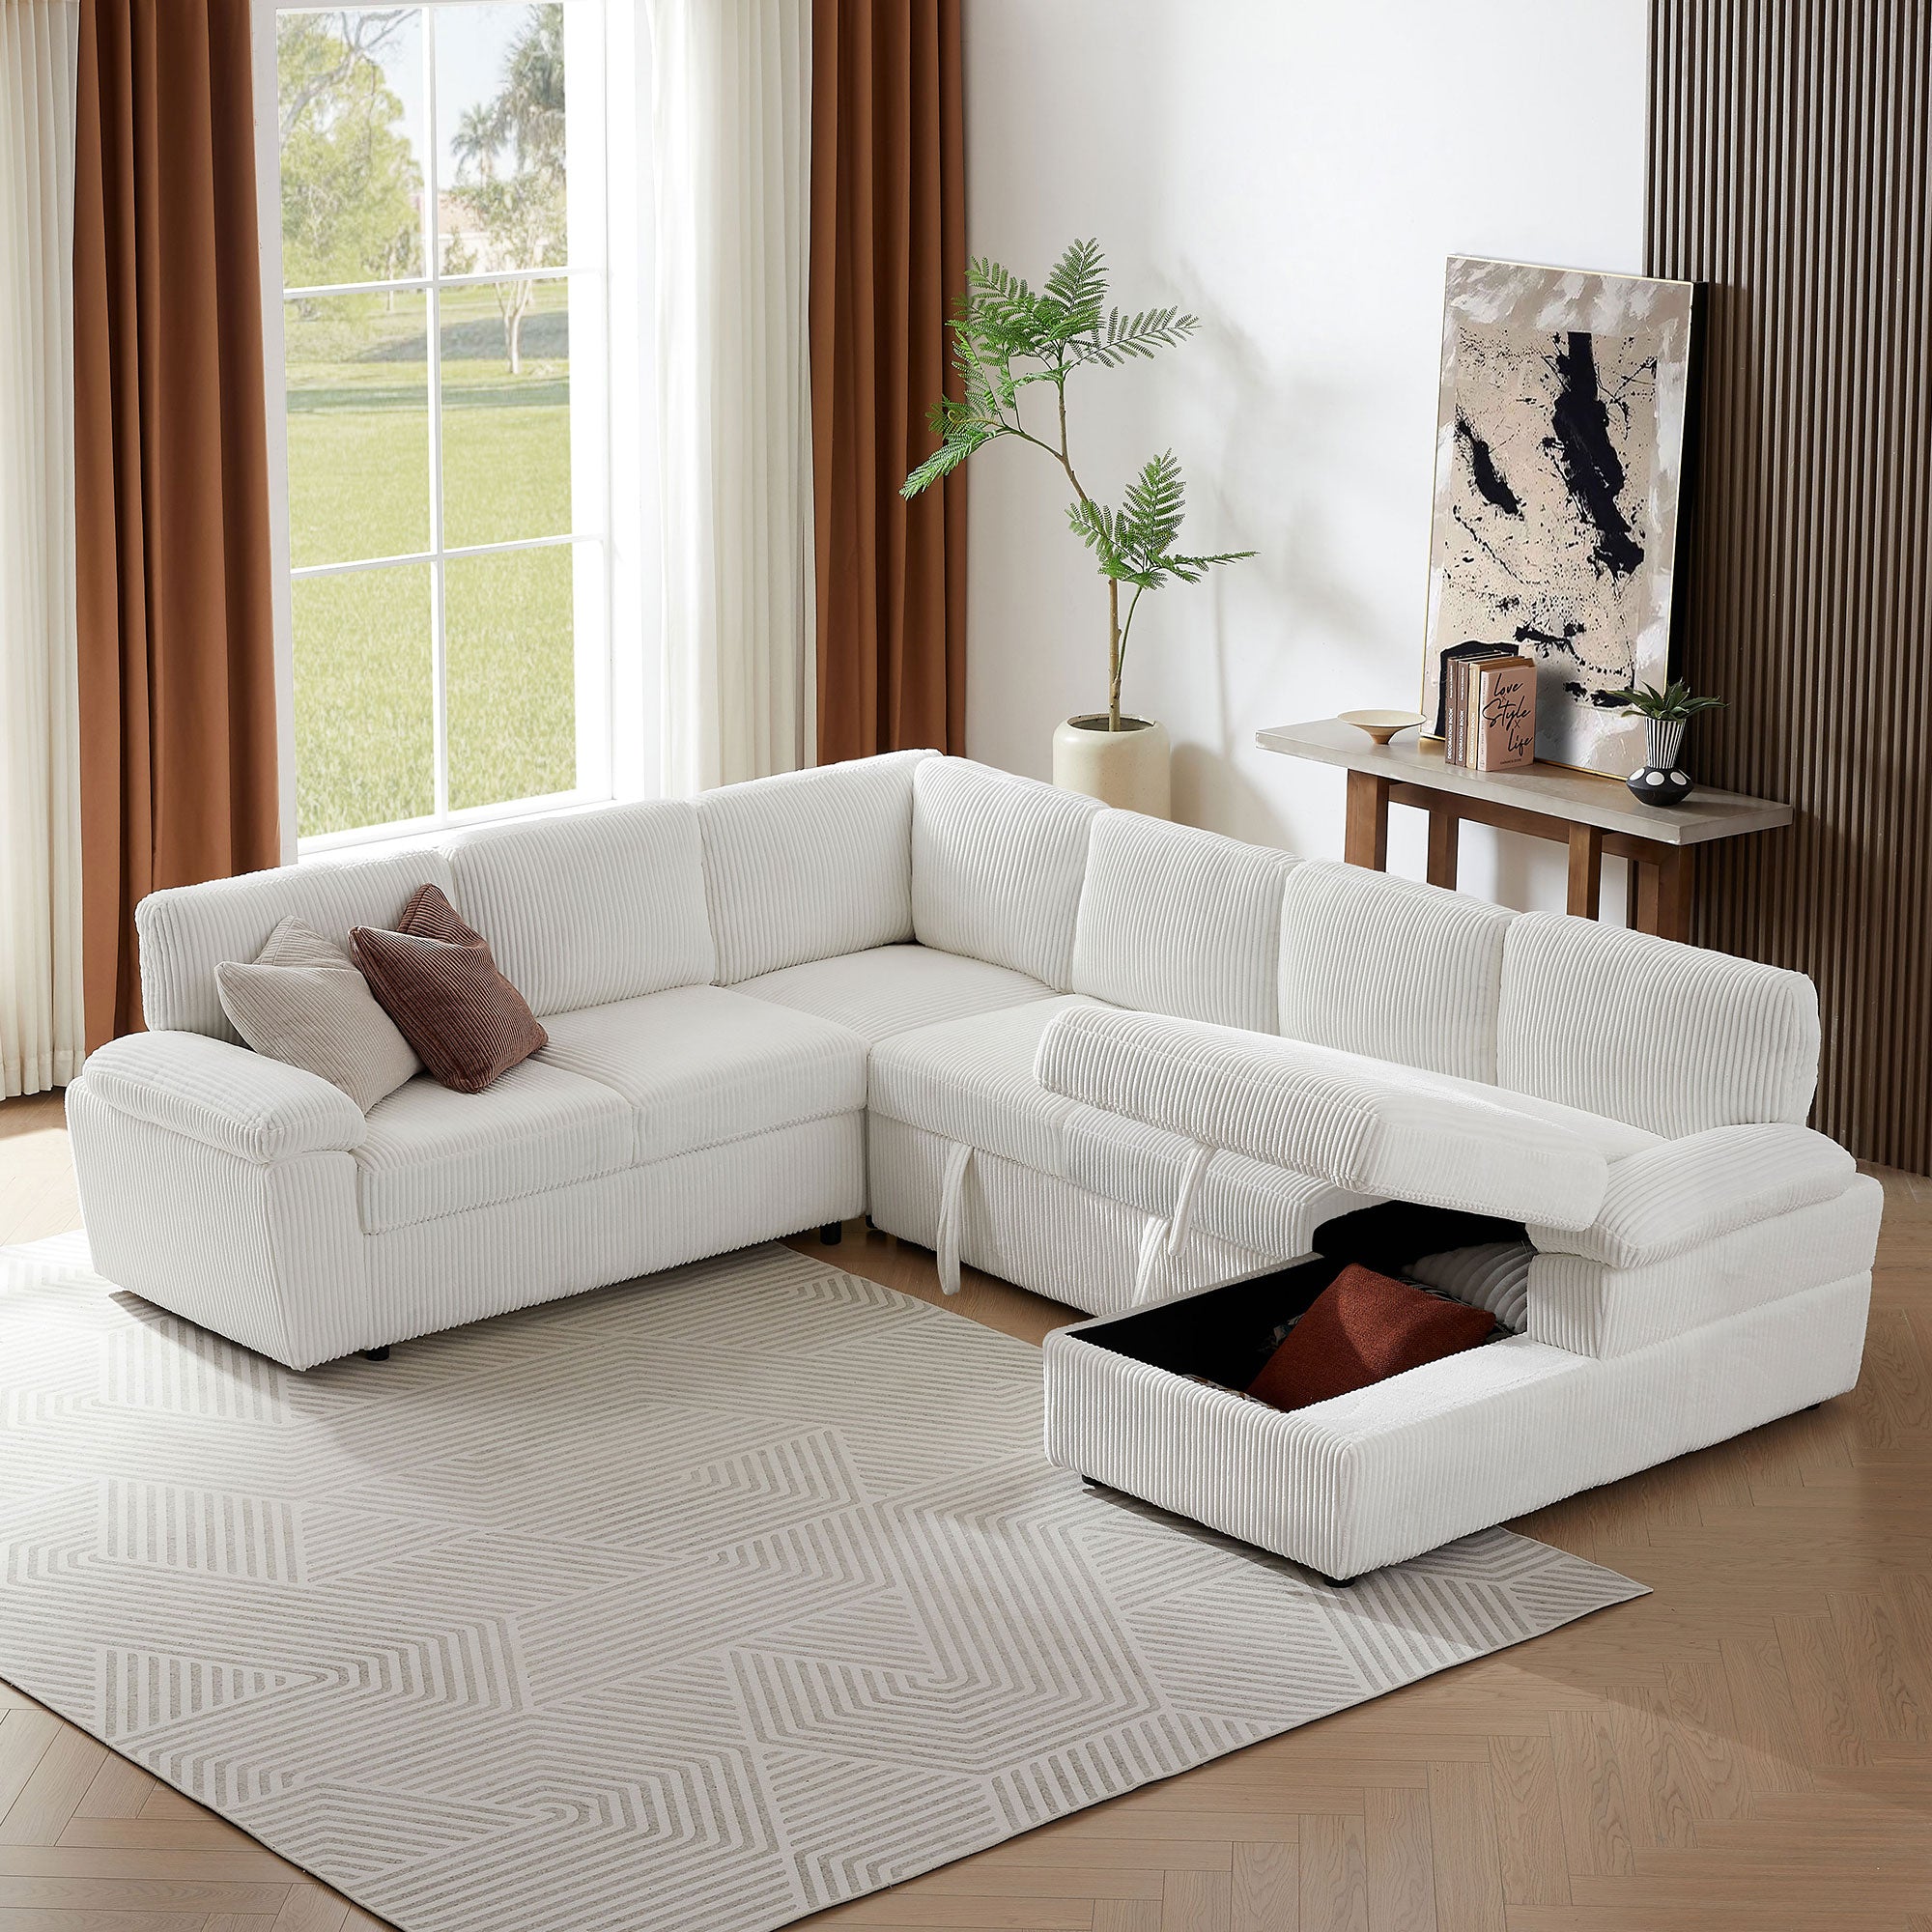 Oversized Modular Storage Sectional Sofa Couch for Living Room